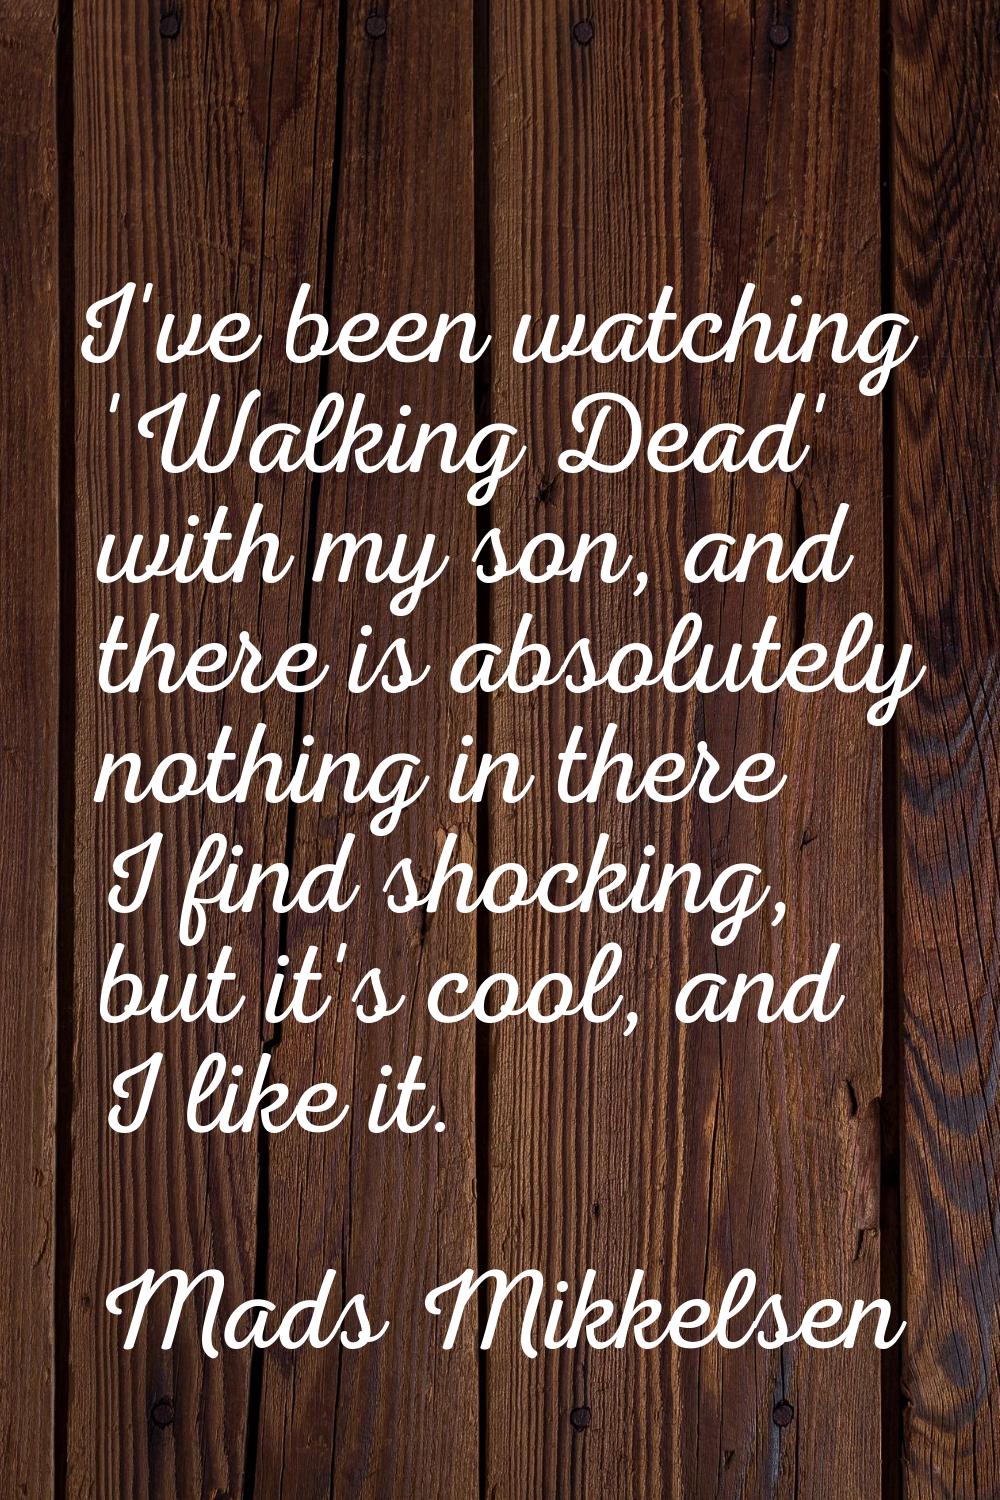 I've been watching 'Walking Dead' with my son, and there is absolutely nothing in there I find shoc